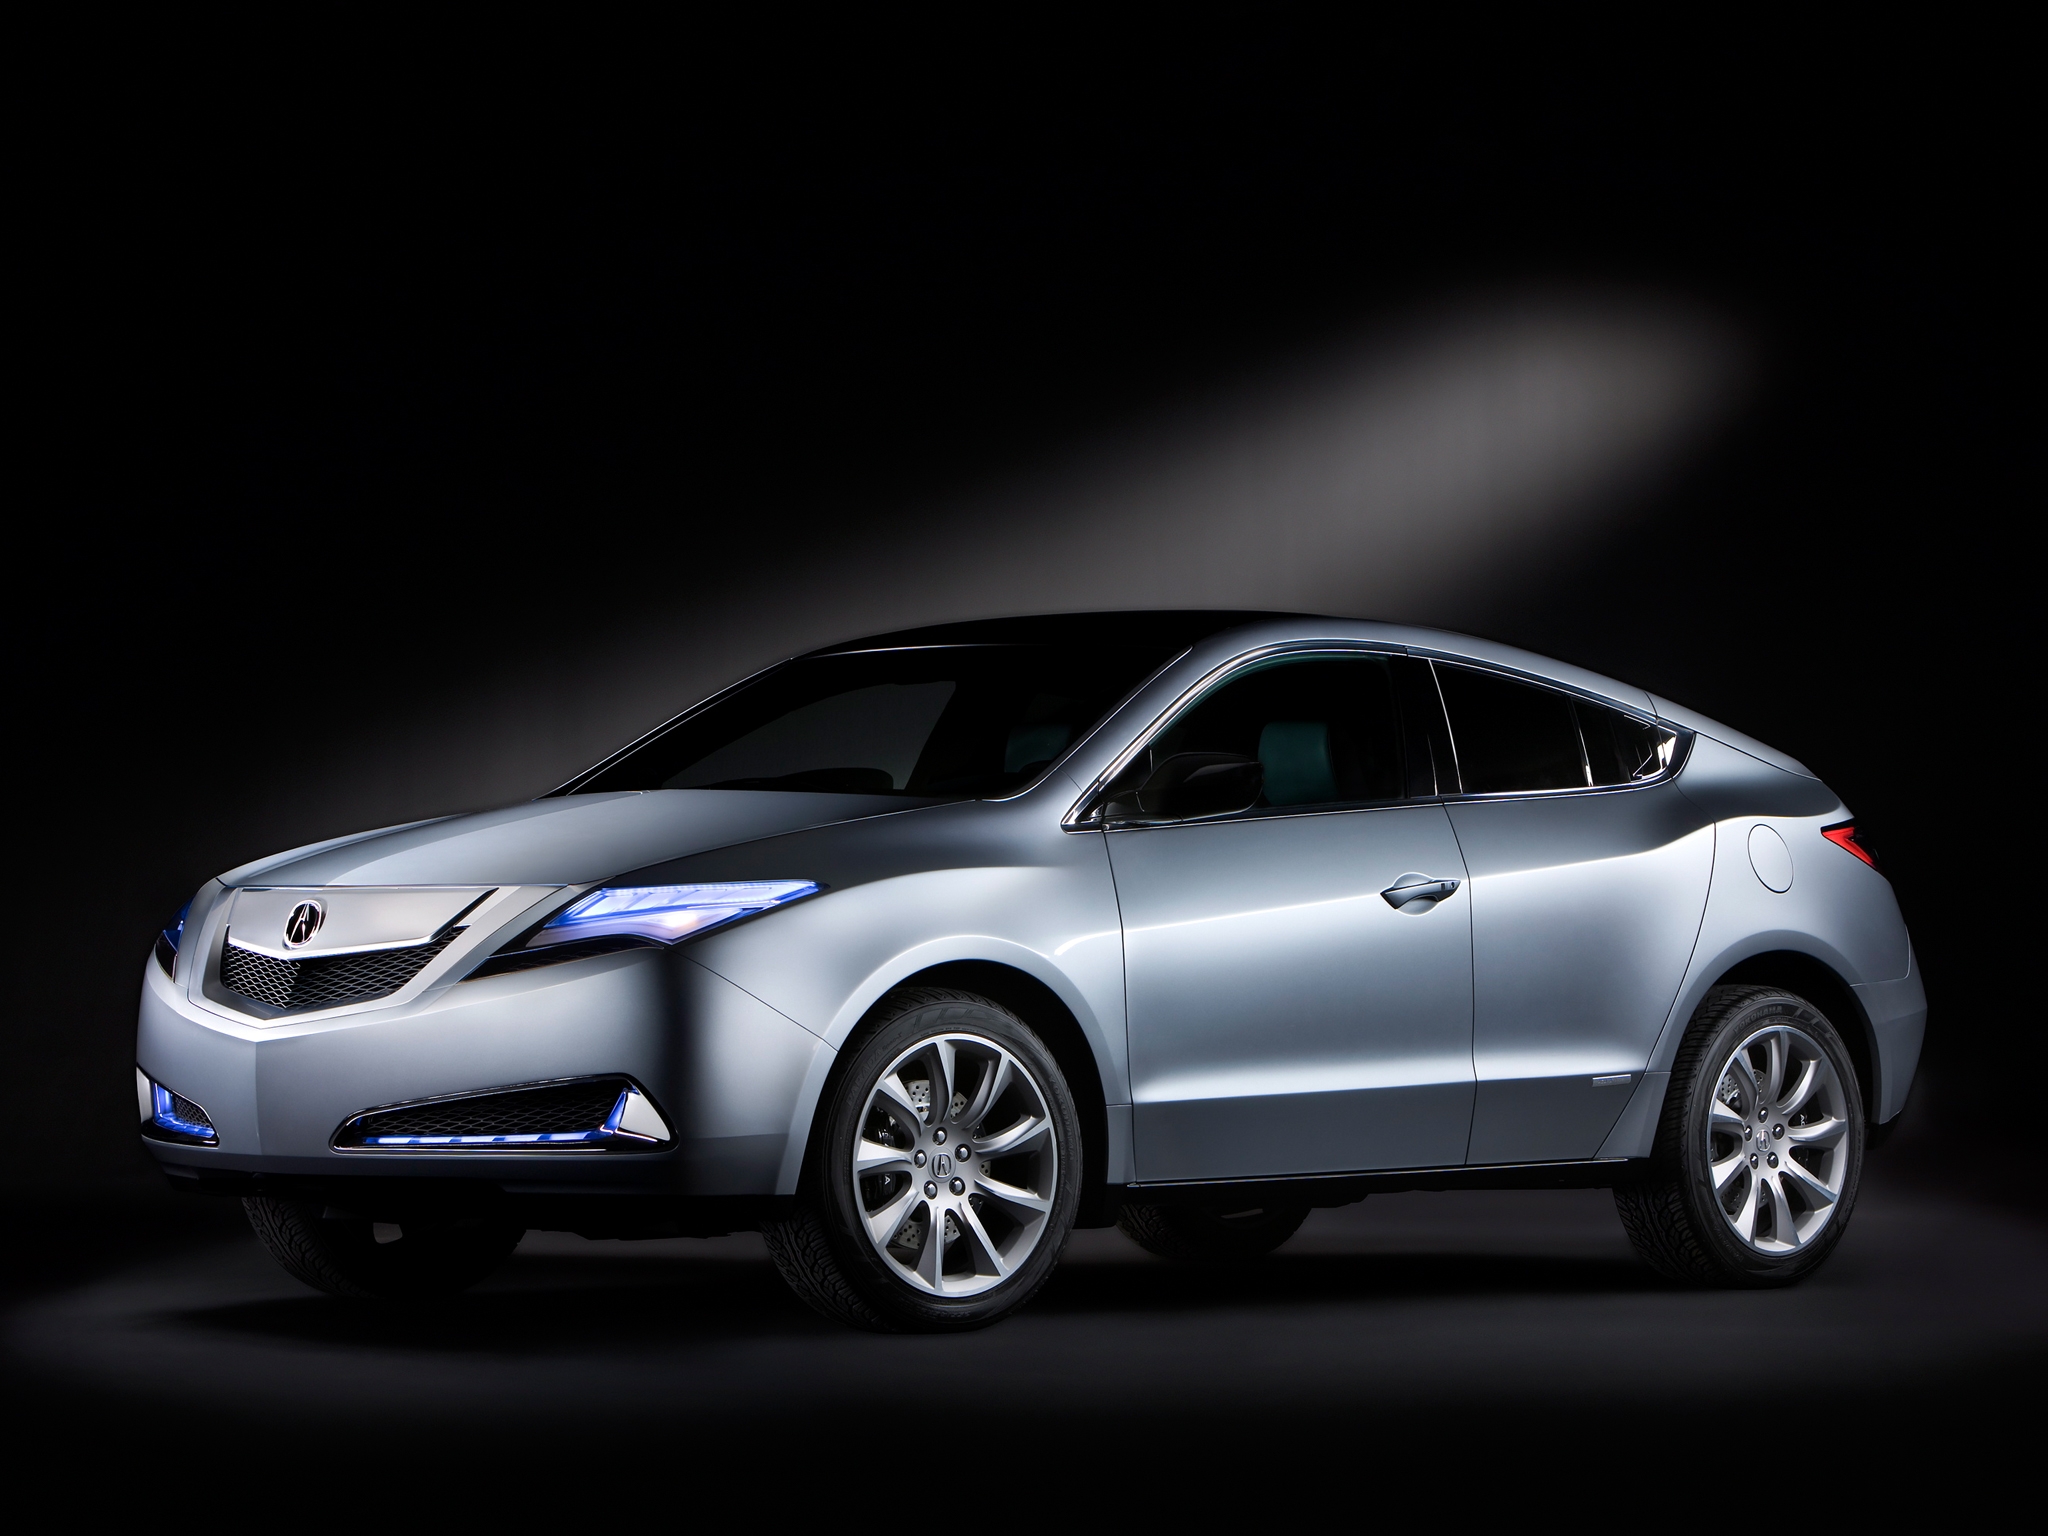 acura, cars, zdx, metallic collection of HD images